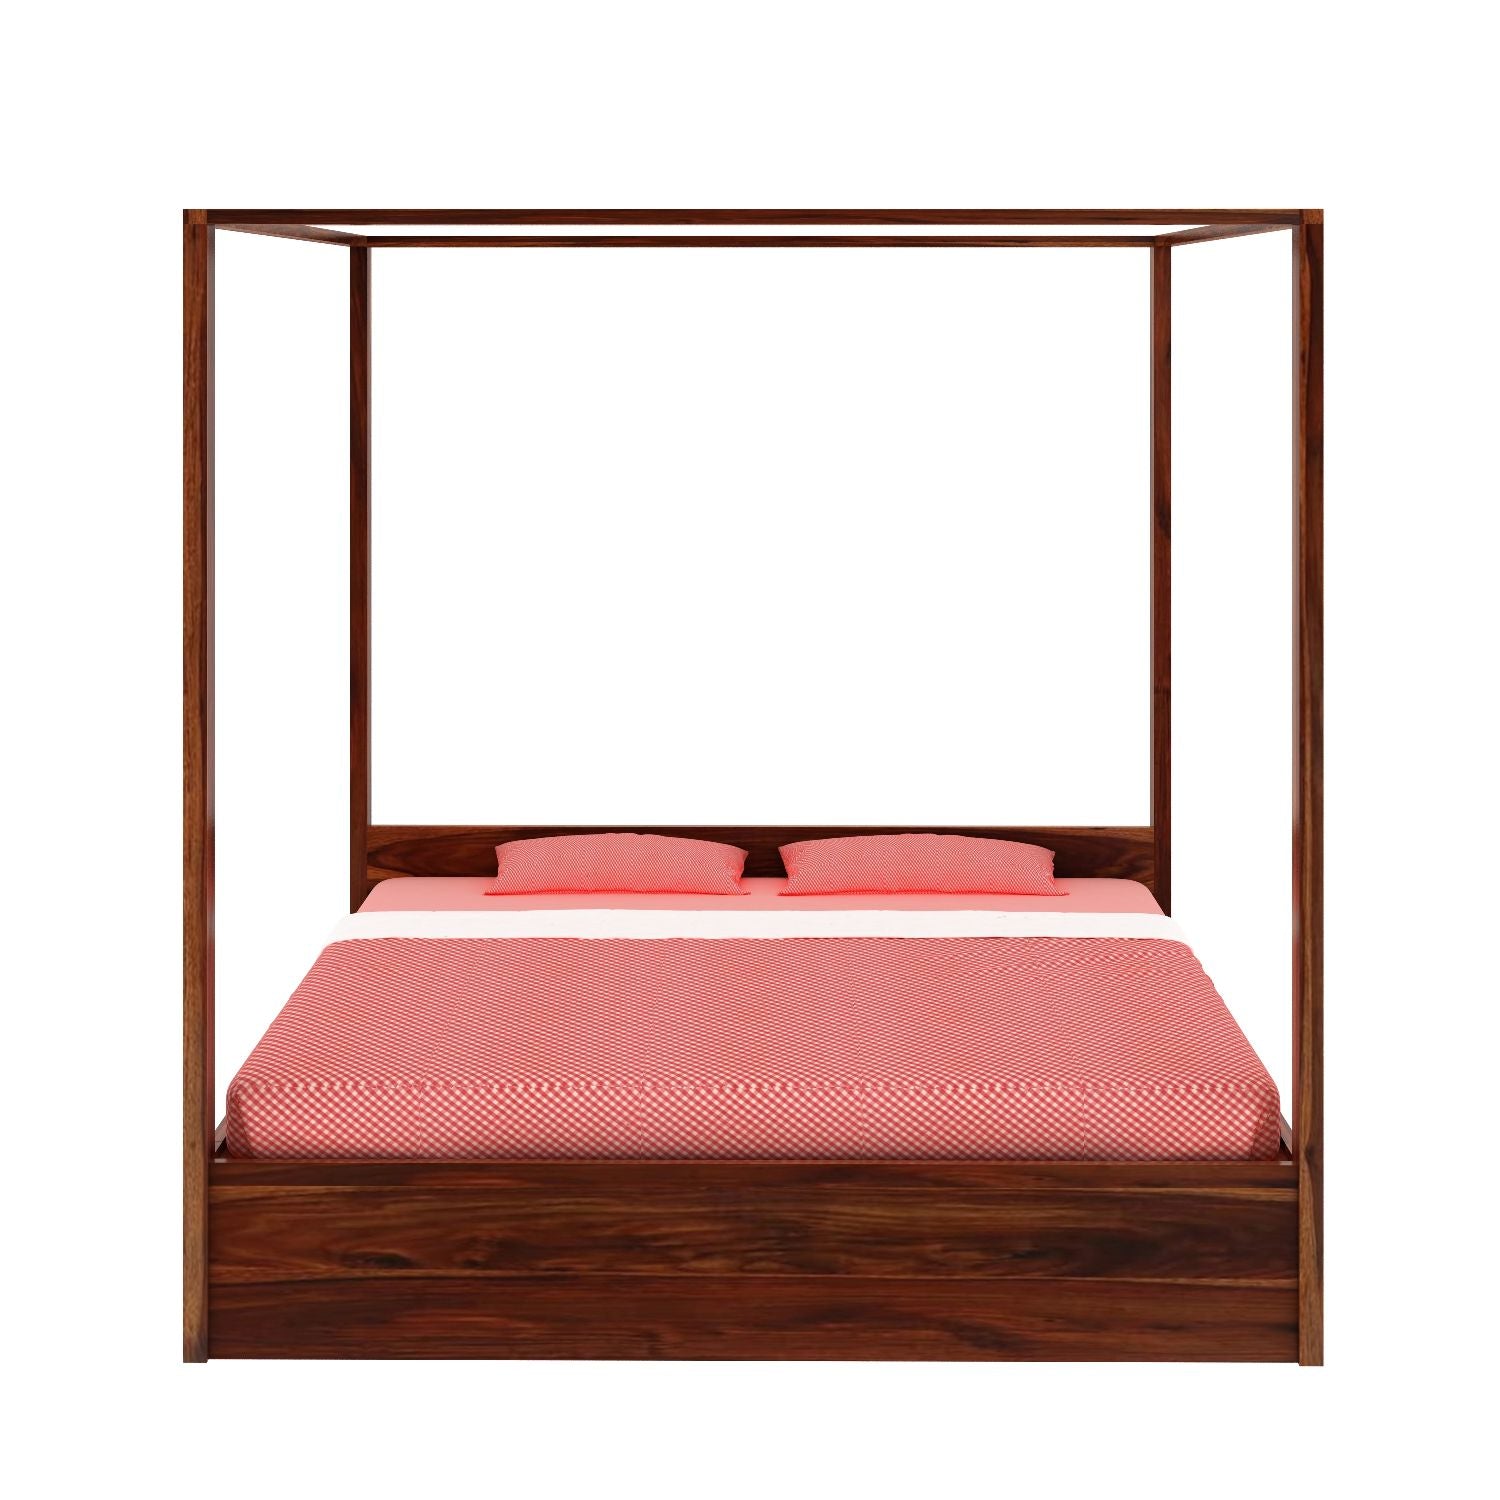 Solivo Solid Sheesham Wood Poster Bed Without Storage (King Size, Natural Finish)